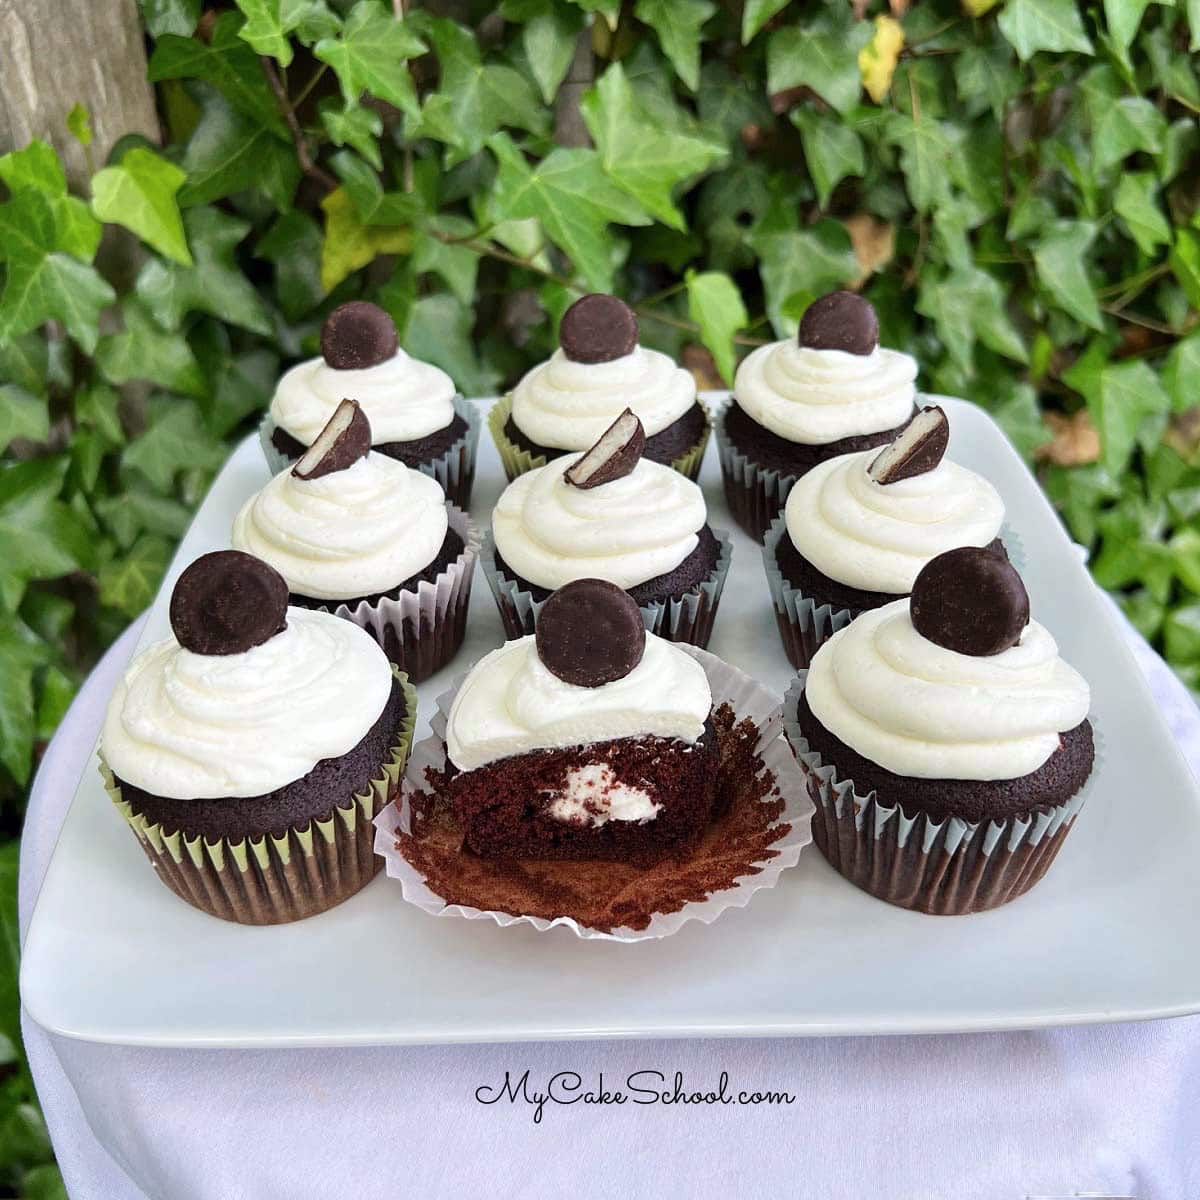 Platter of Mint Chocolate Cupcakes.